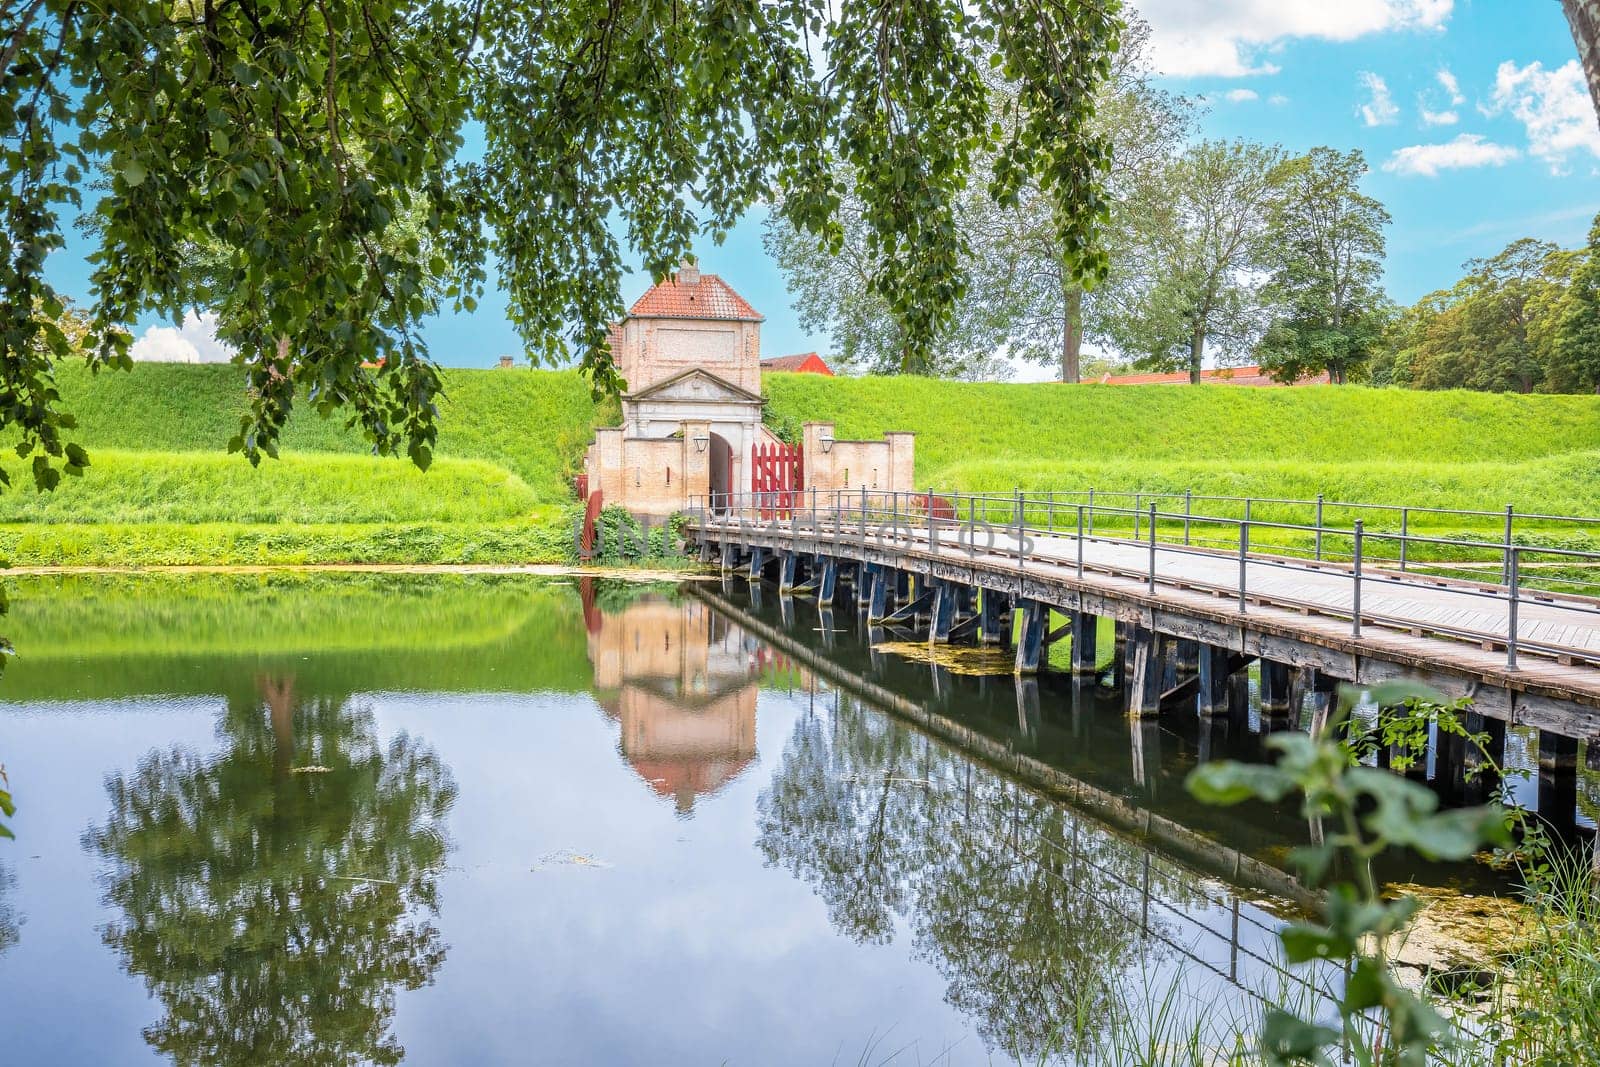 Copenhagen Kastellet lake and northern gate scenic view by xbrchx